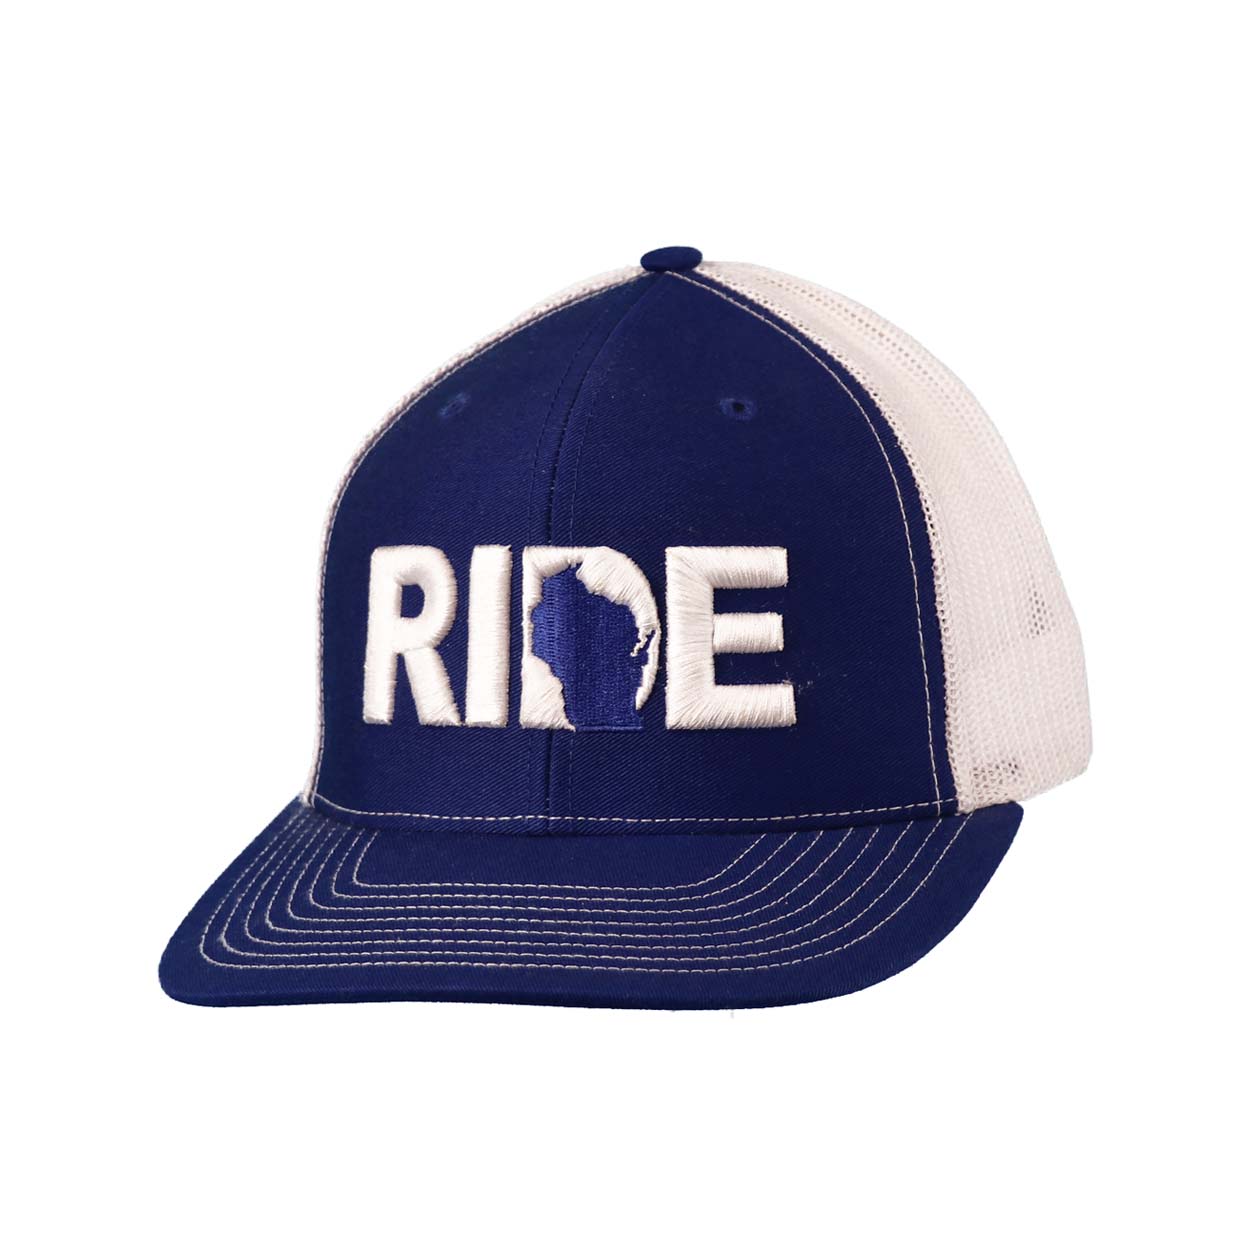 Ride Wisconsin Classic Embroidered Snapback Trucker Hat Blue/White